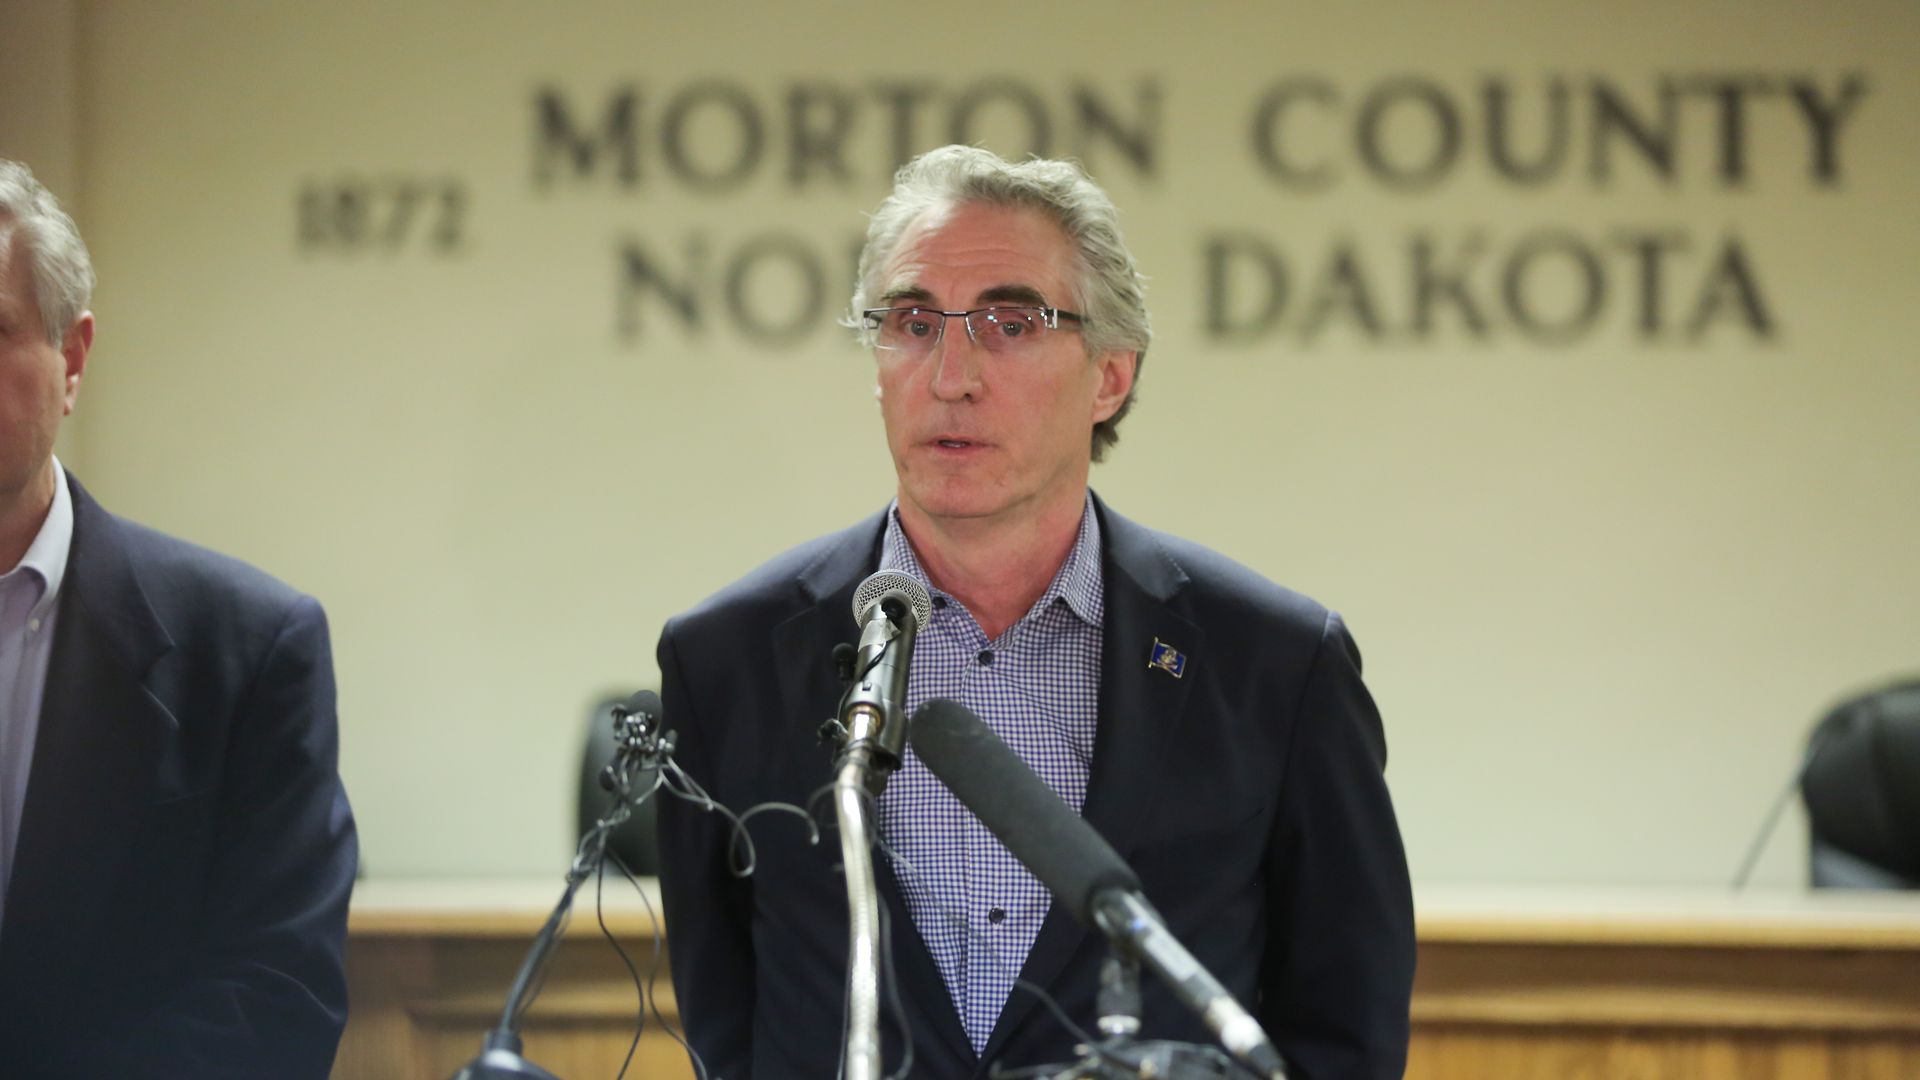 North Dakota Governor Doug Burgum speaks during a press conference announcing plans for the clean up of the Oceti Sakowin protest camp on February 22, 2017 in Mandan, North Dakota